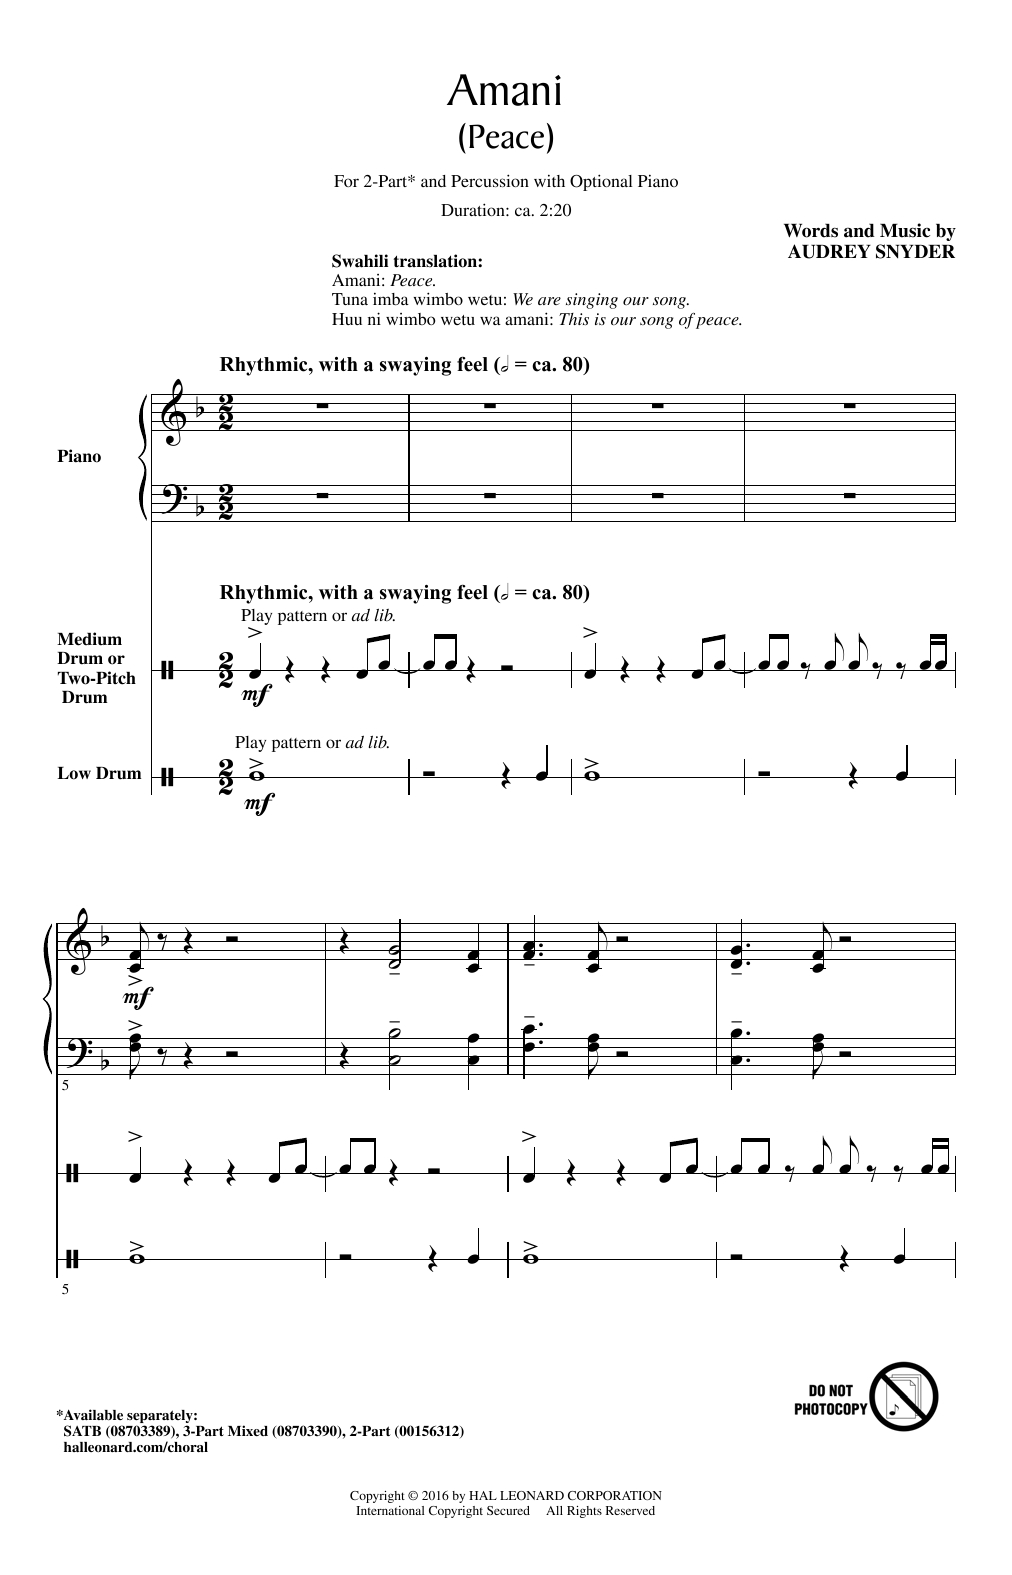 Download Audrey Snyder Amani (Peace) Sheet Music